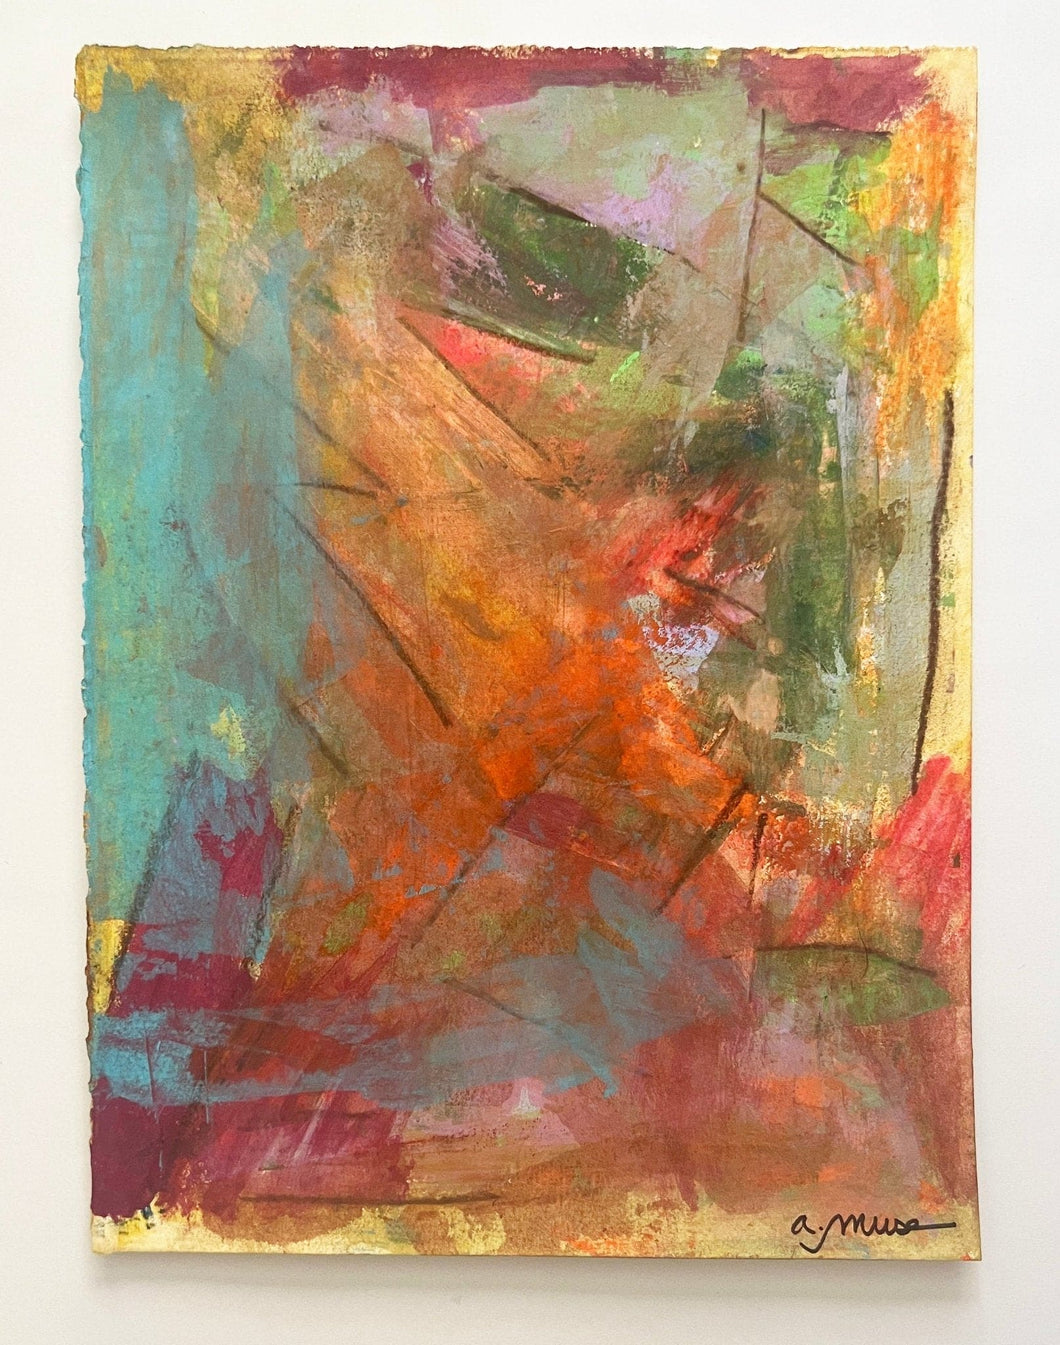 Portrait of Paris, 2019 by a.muse, Semi-Abstract Work on Paper